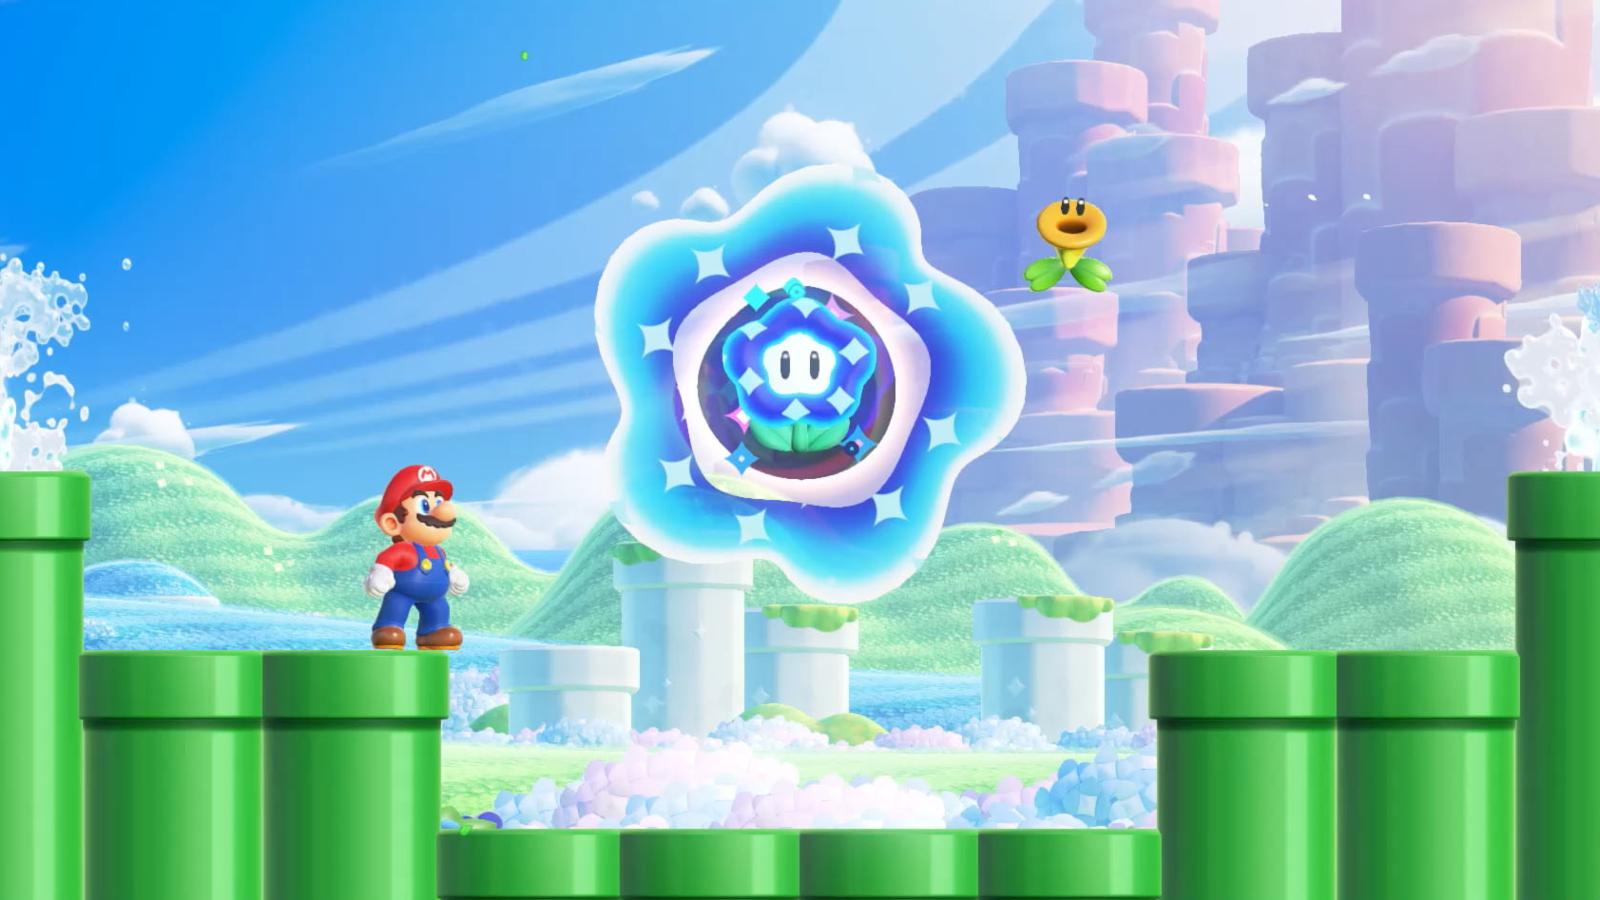 Experience the Unexpected in Super Mario Bros. Wonder Gameplay Presentation